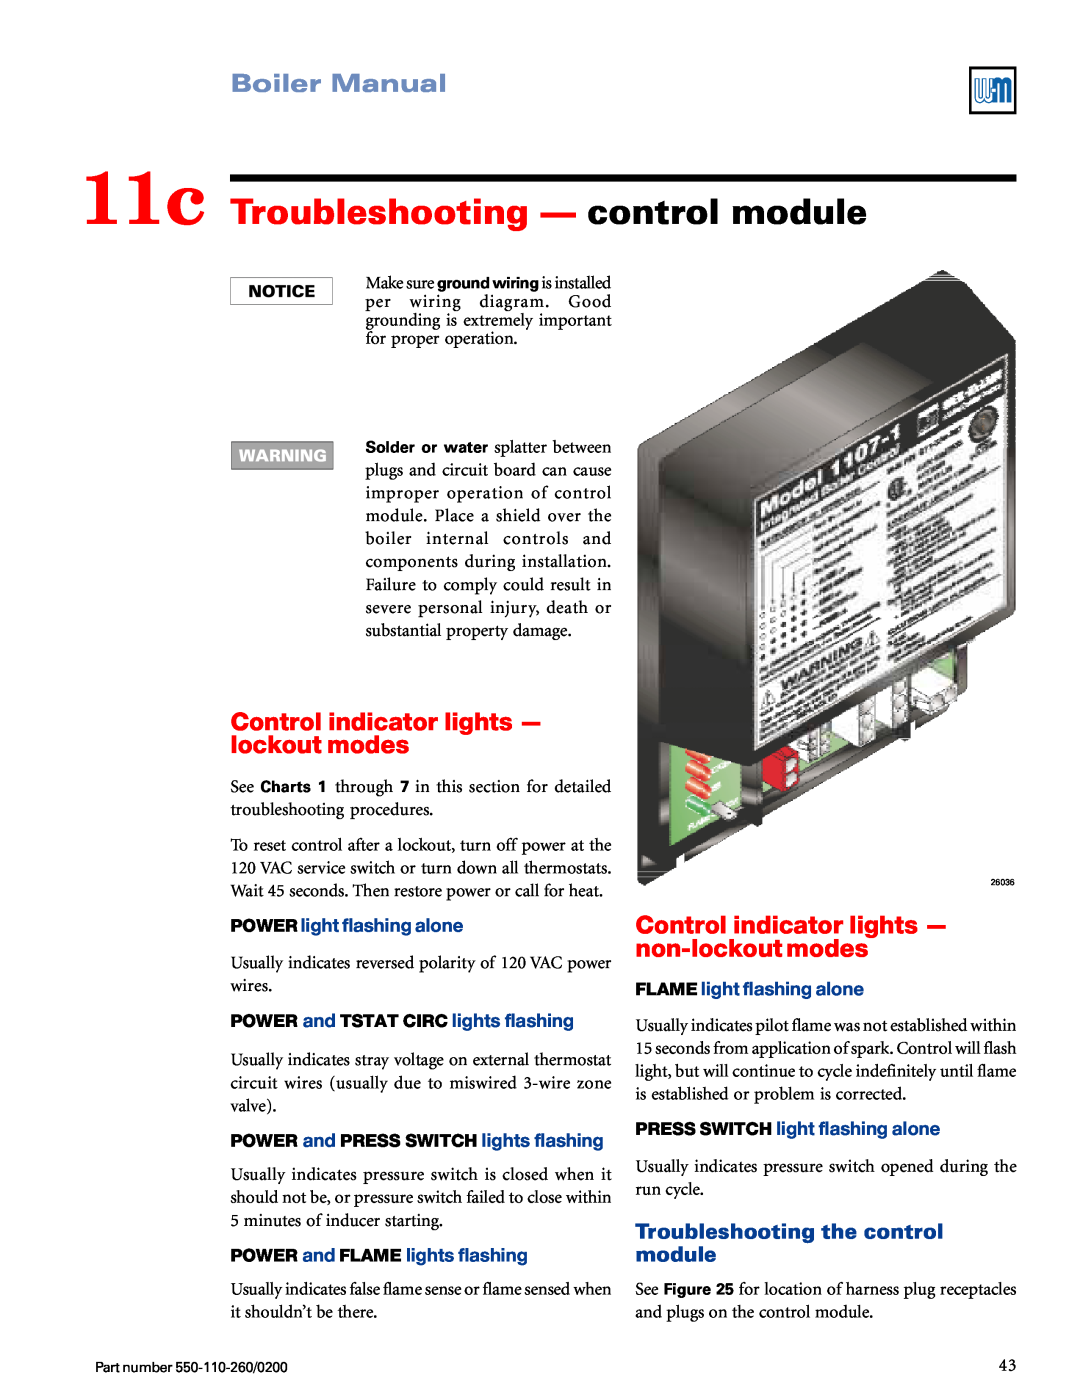 Weil-McLain 550-110-260/02002 manual 11c Troubleshooting — control module, Control indicator lights — lockout modes 